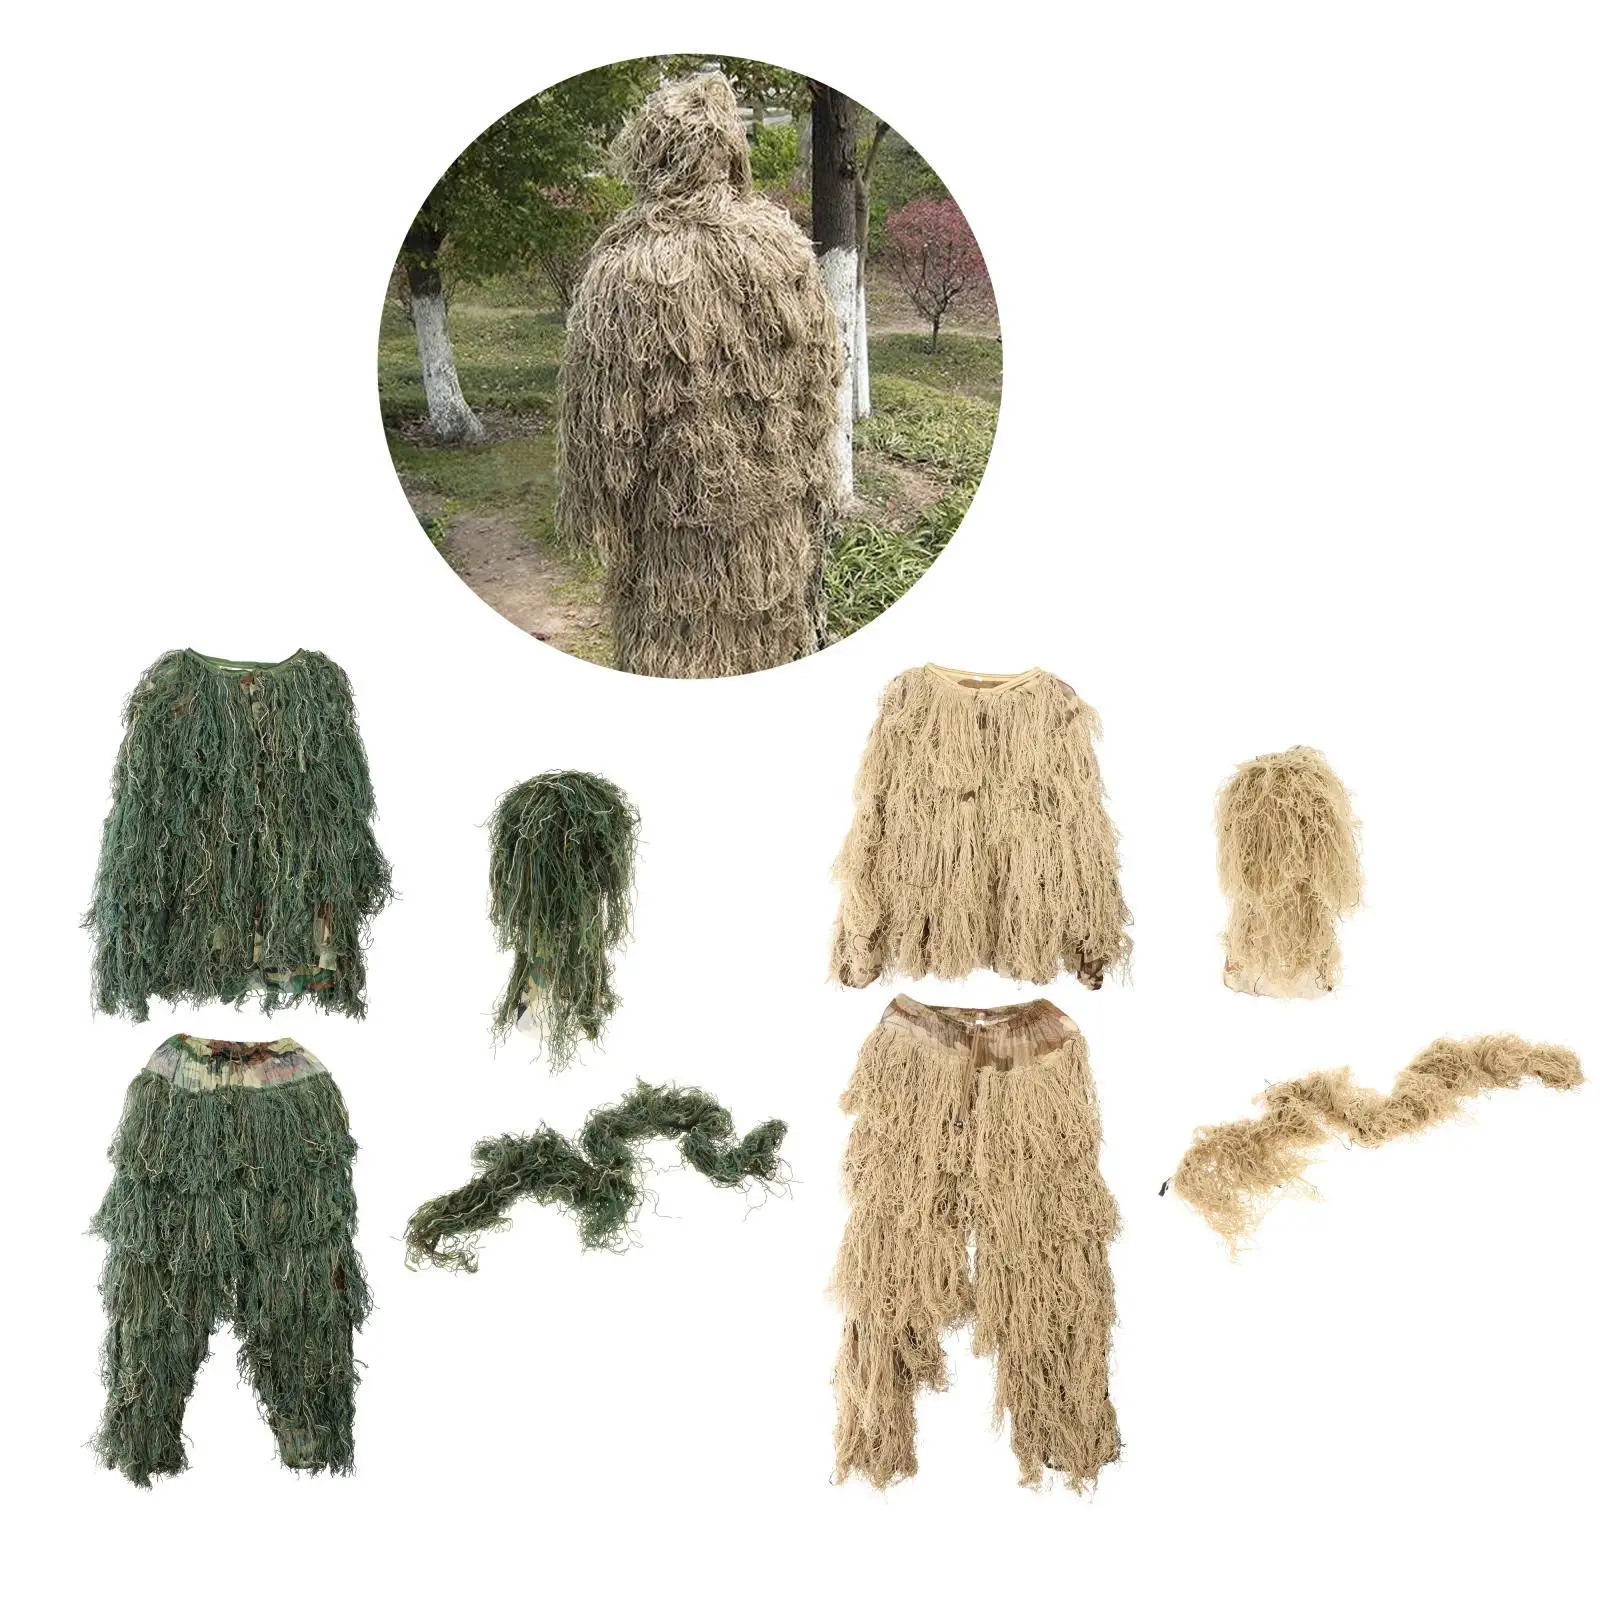 Camo Hooded Stretchy Ghillie Suits Clothes Jacket Pants for Hunting